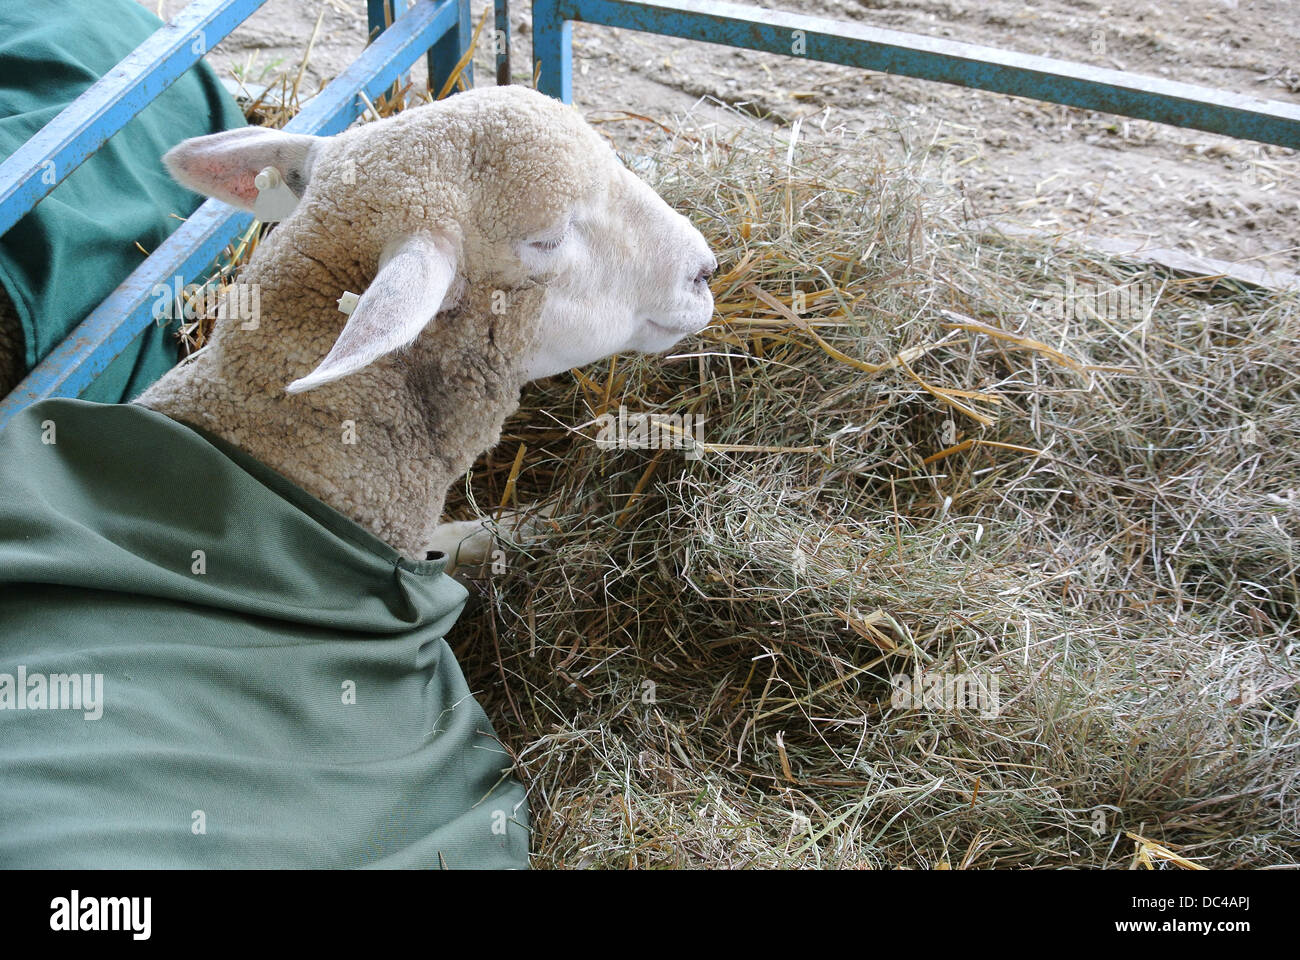 A sheep in a pen of hay Stock Photo